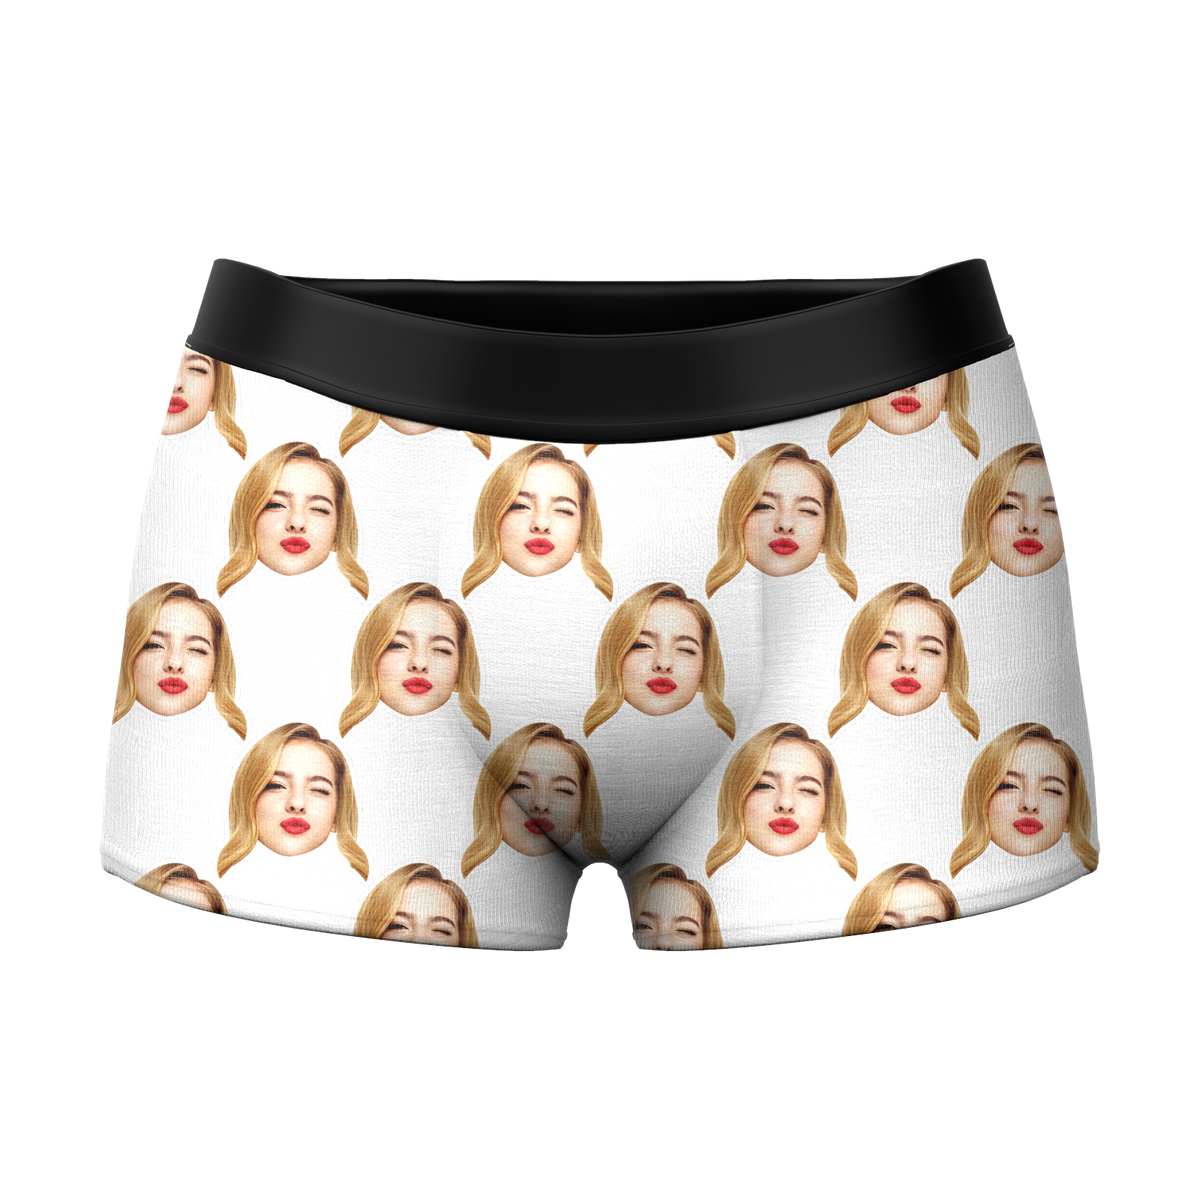 Men's Custom Colorful Face Boxer Shorts 3D Online Preview Christmas Gifts